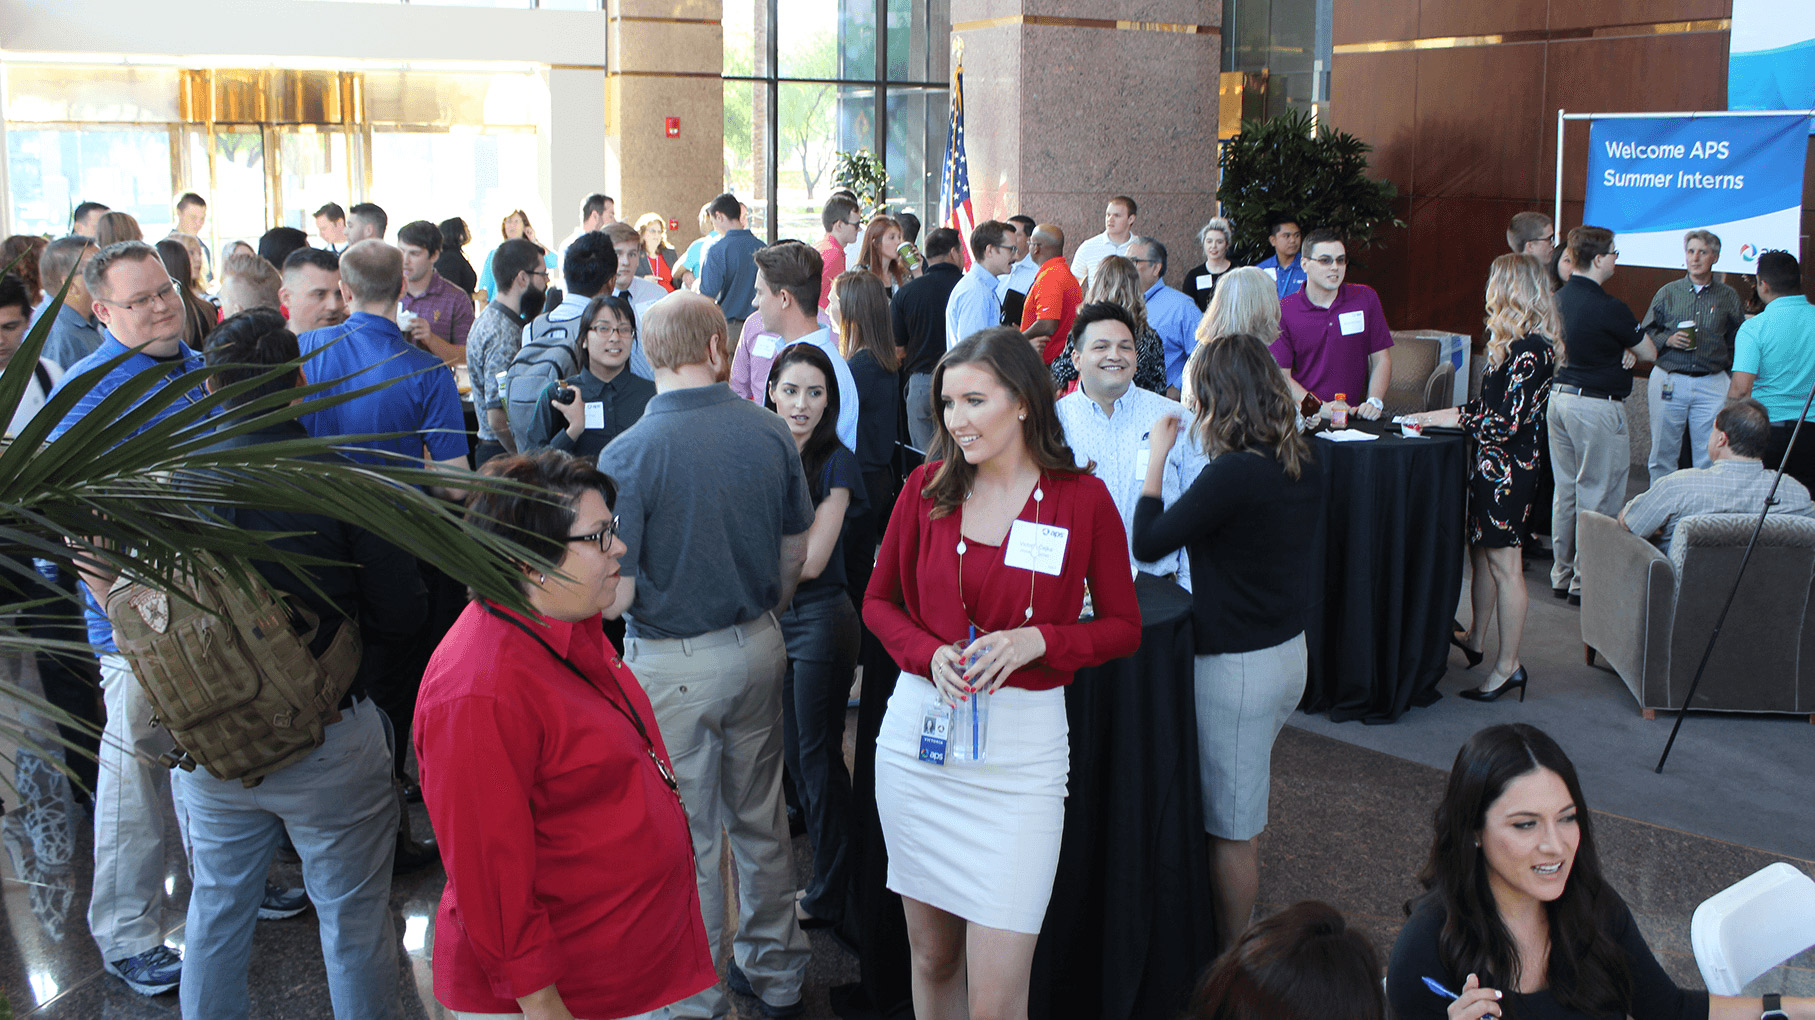 APS interns and employees talking at the summer internship welcome event.